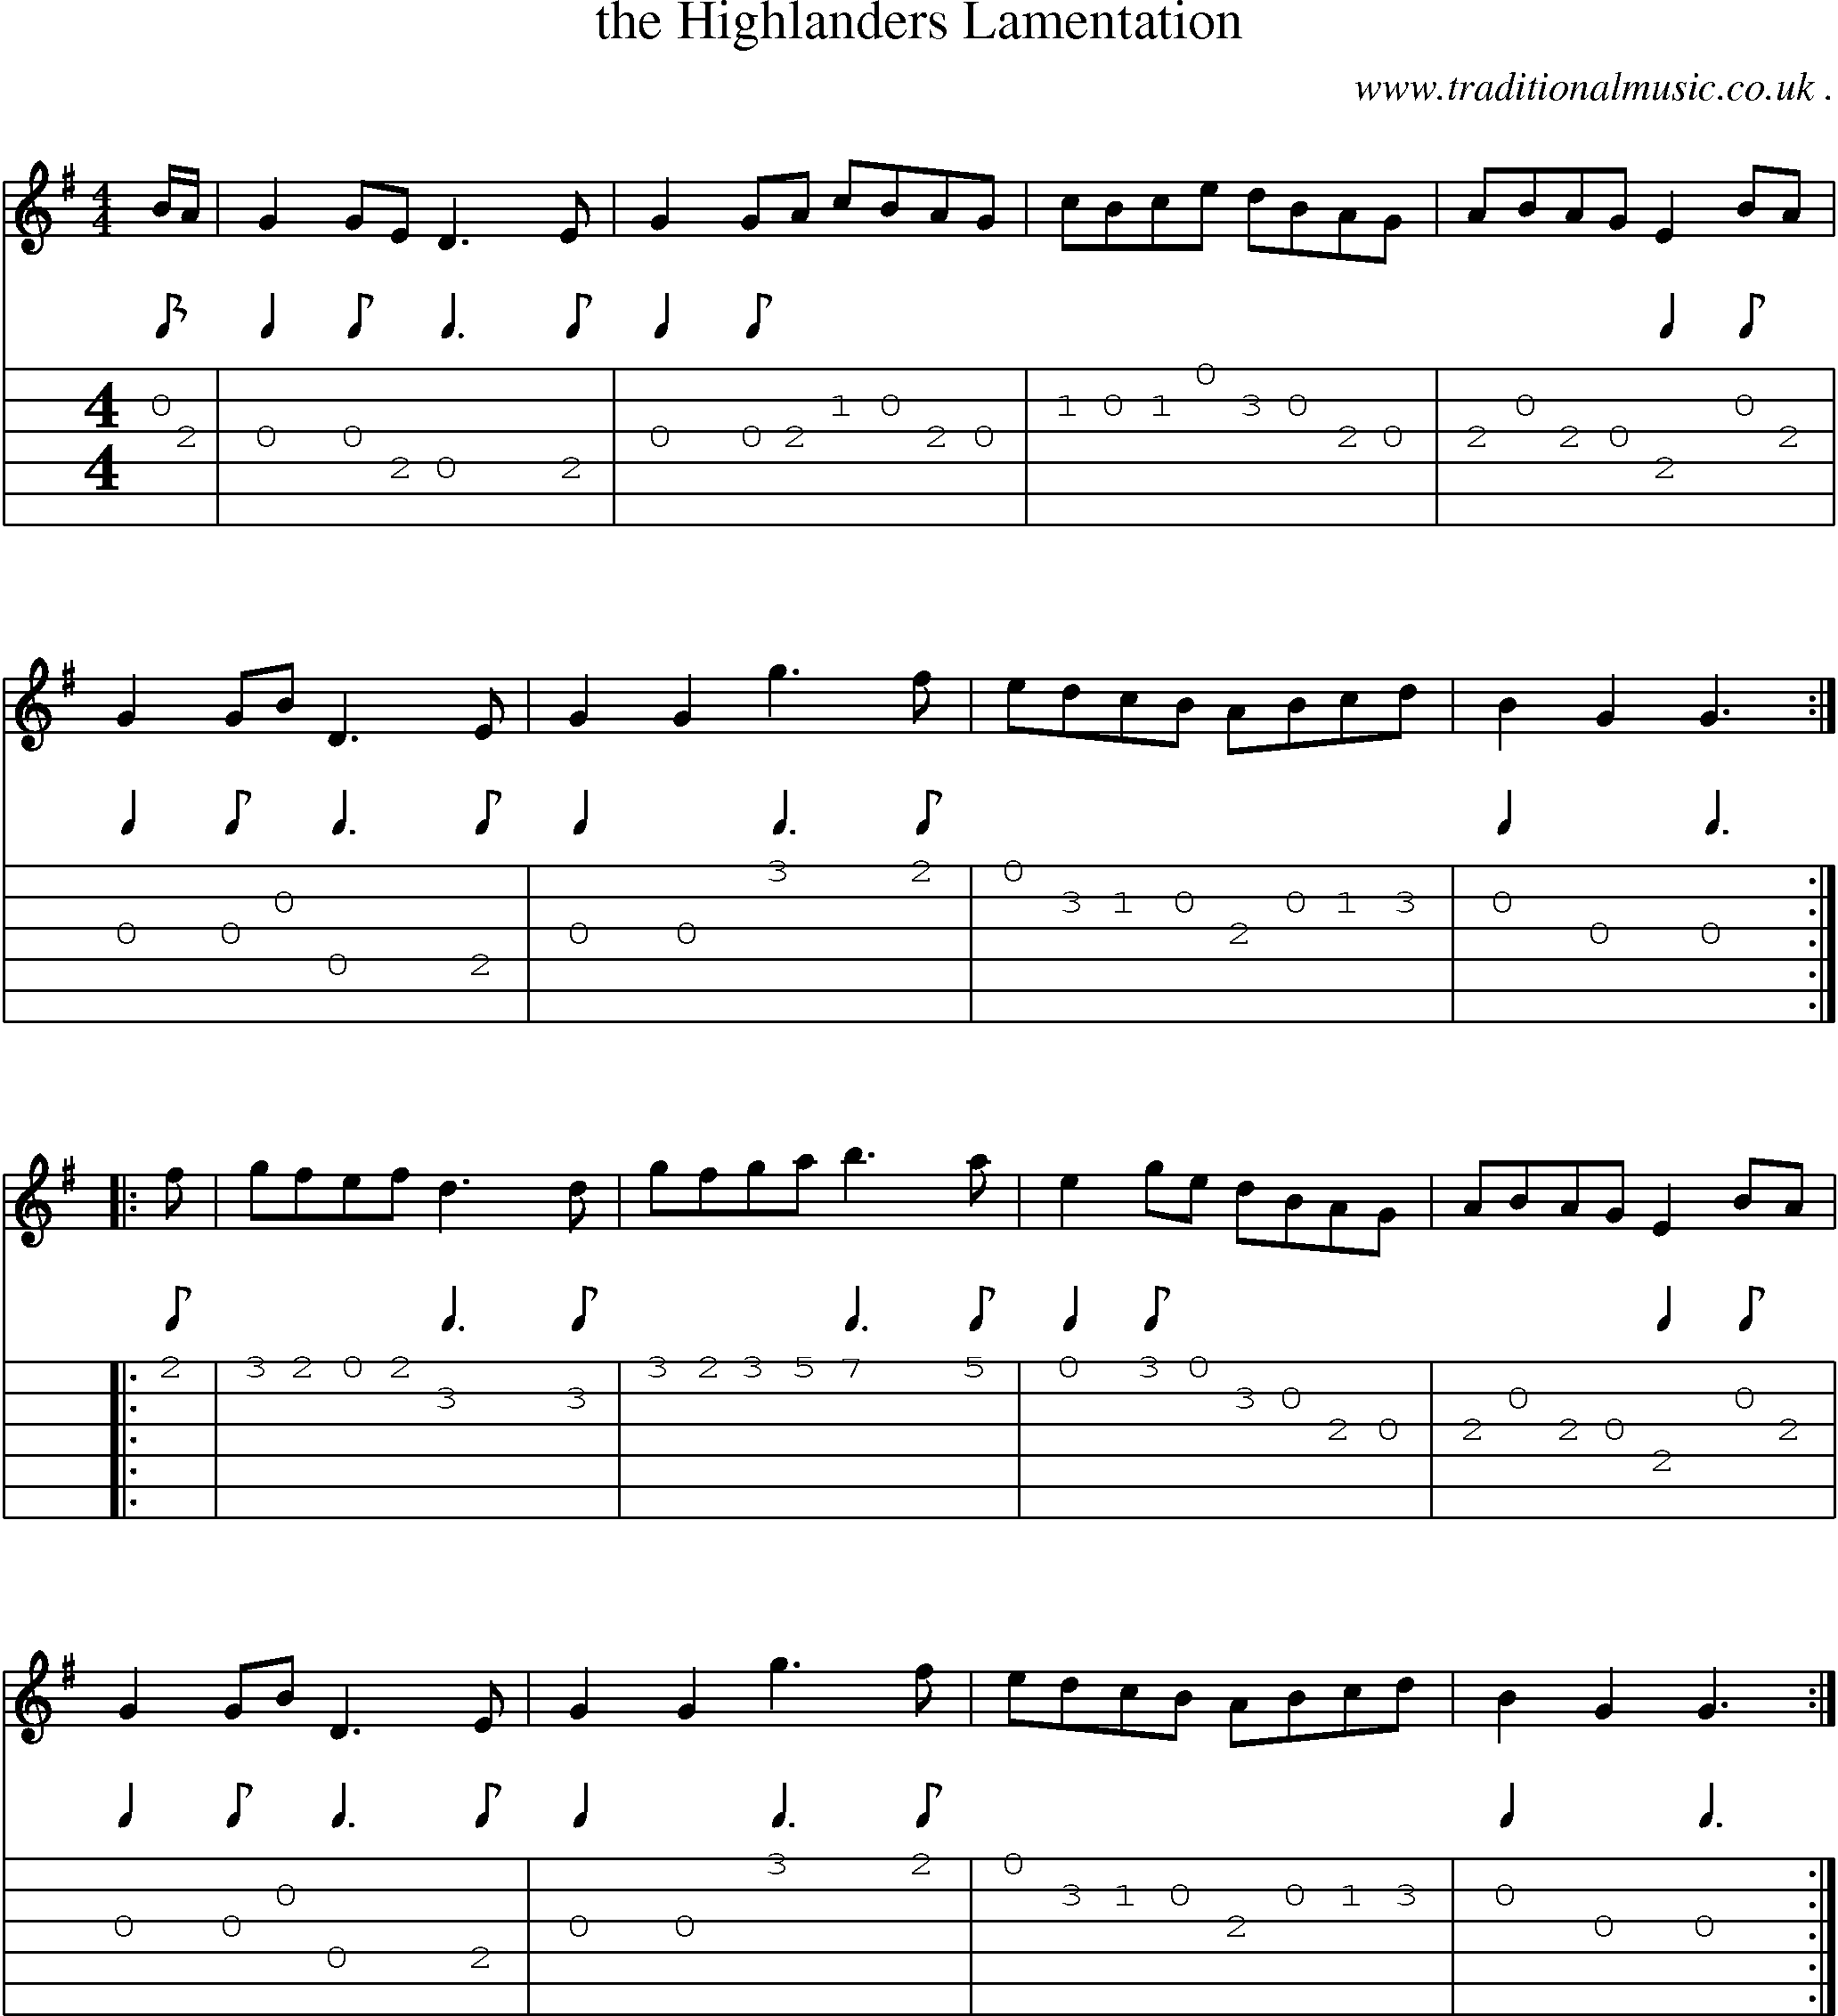 Sheet-Music and Guitar Tabs for The Highlanders Lamentation